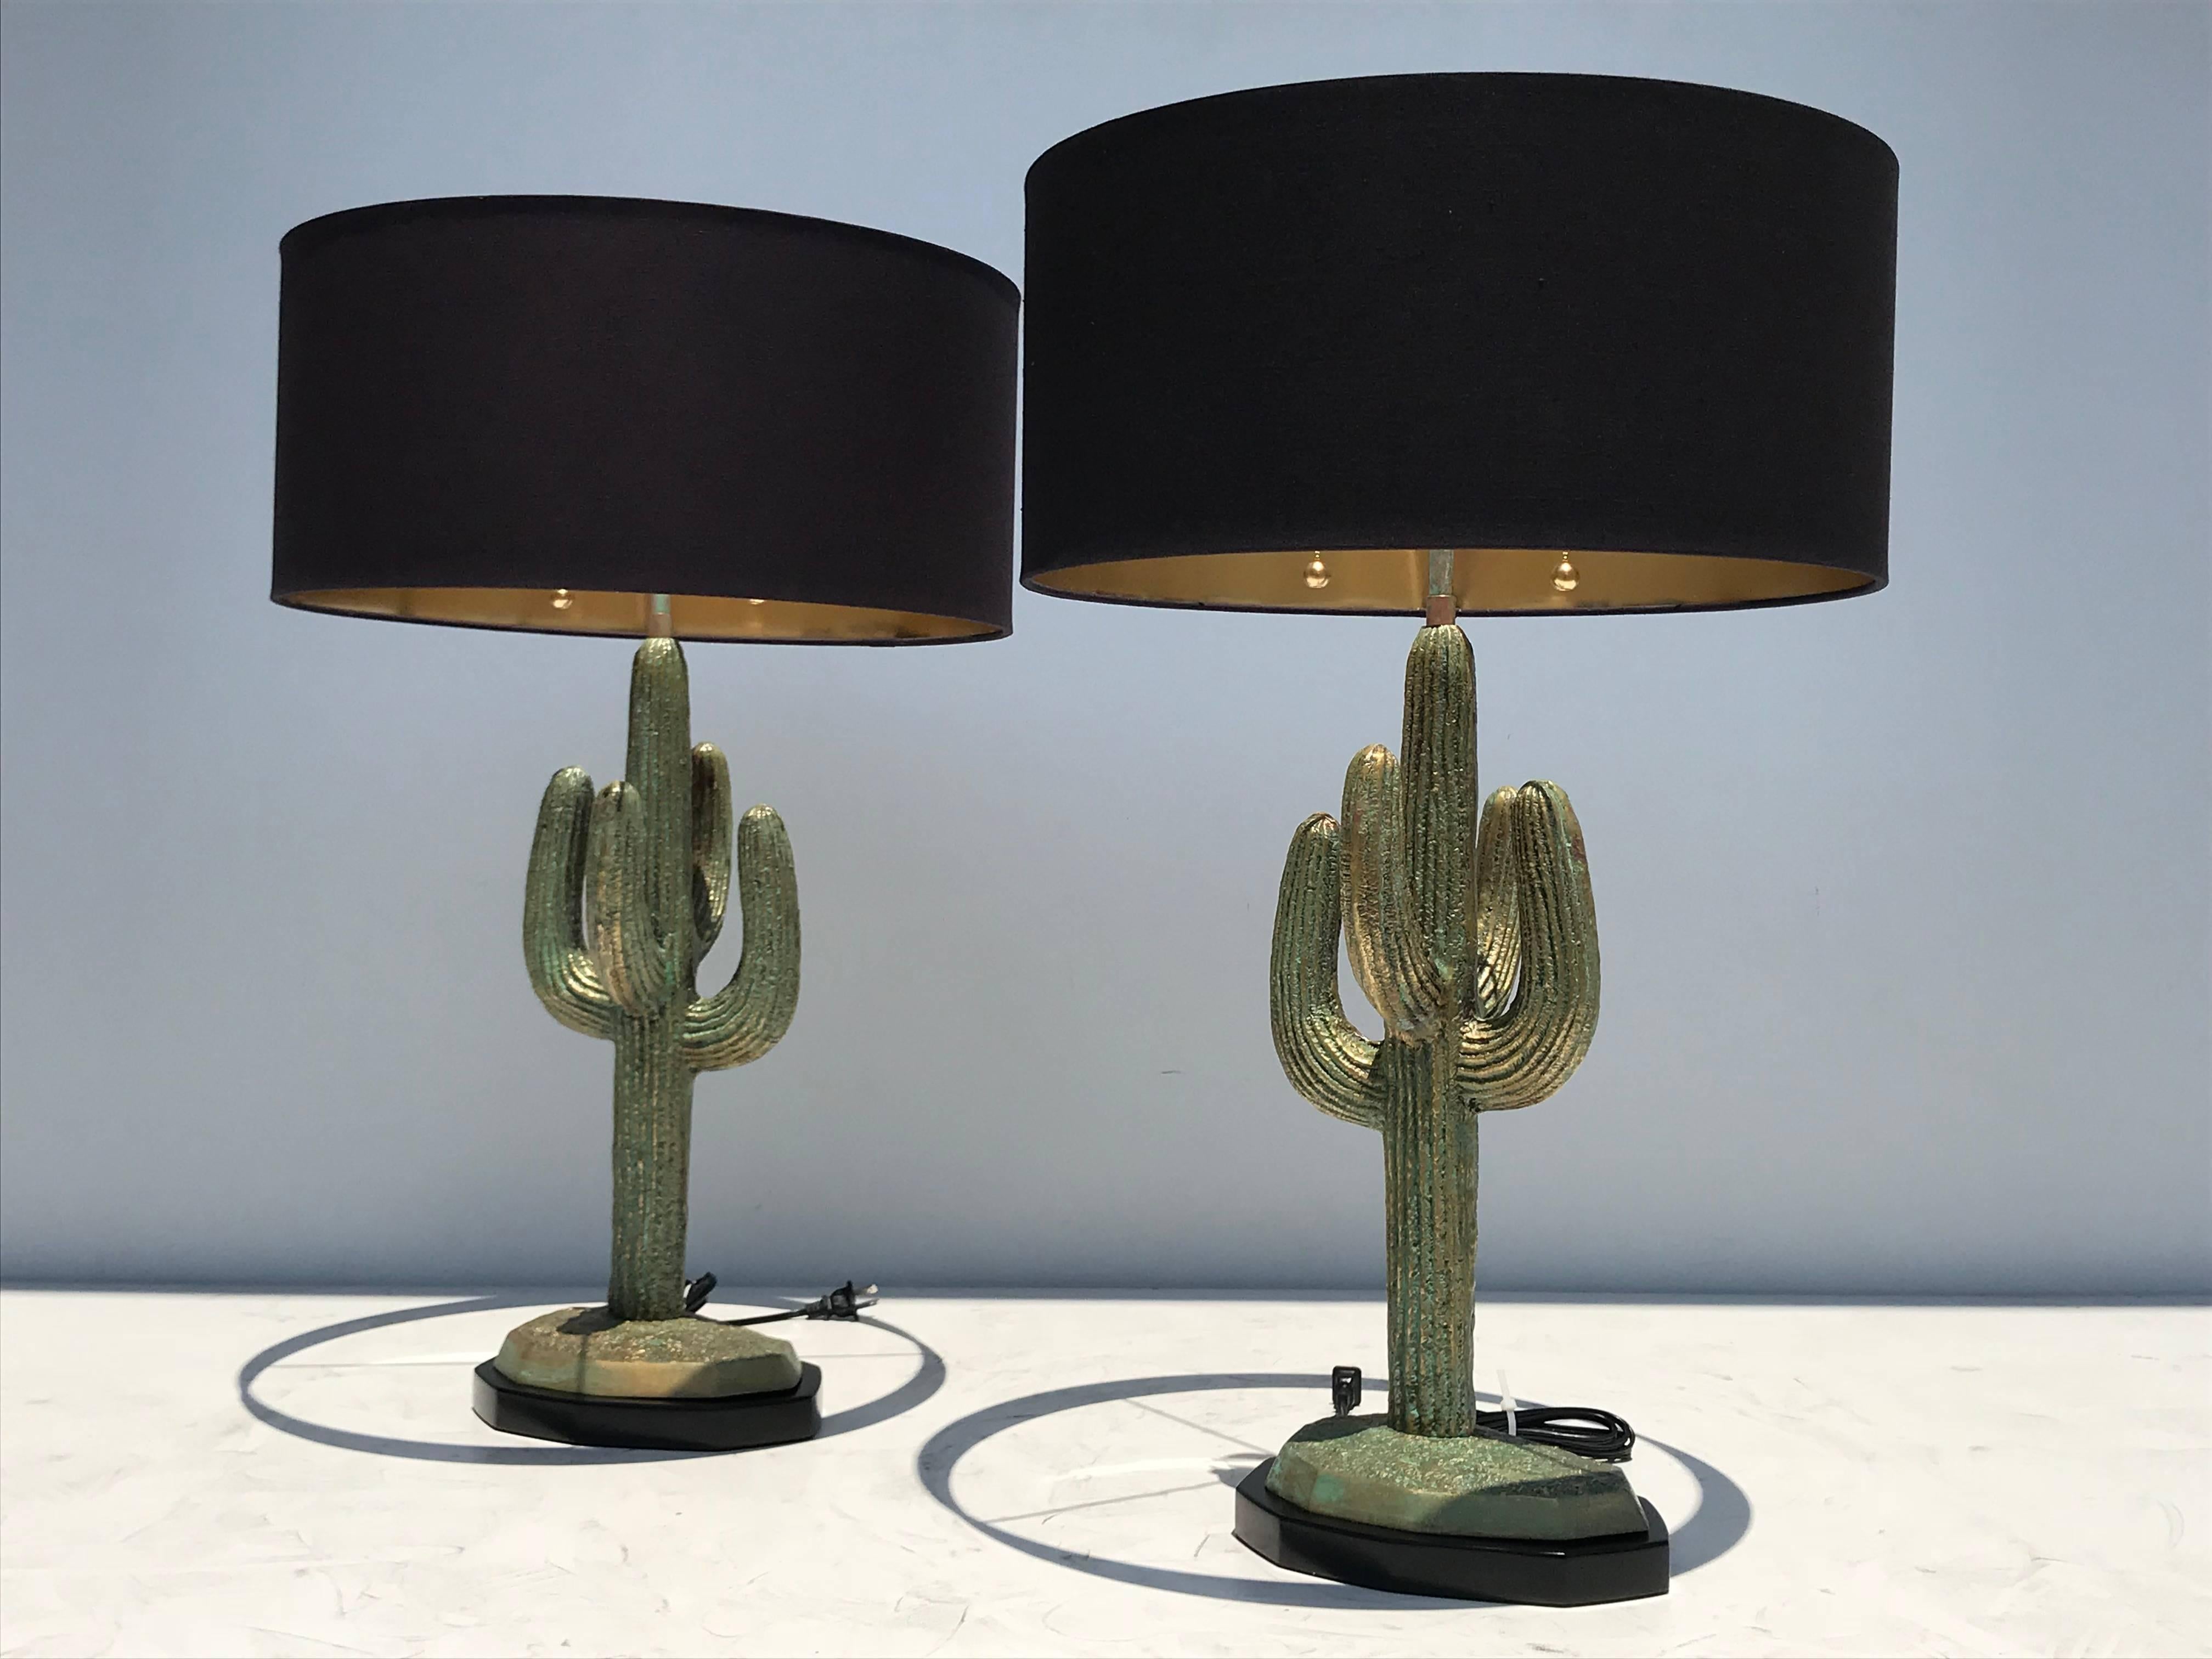 Pair of verdigris patina brass cactus lamps. Last photo shown with our massive cactus lamp 1stdibs reference number LU98505994453 for scale purposes.
Lamp shade shown is 18